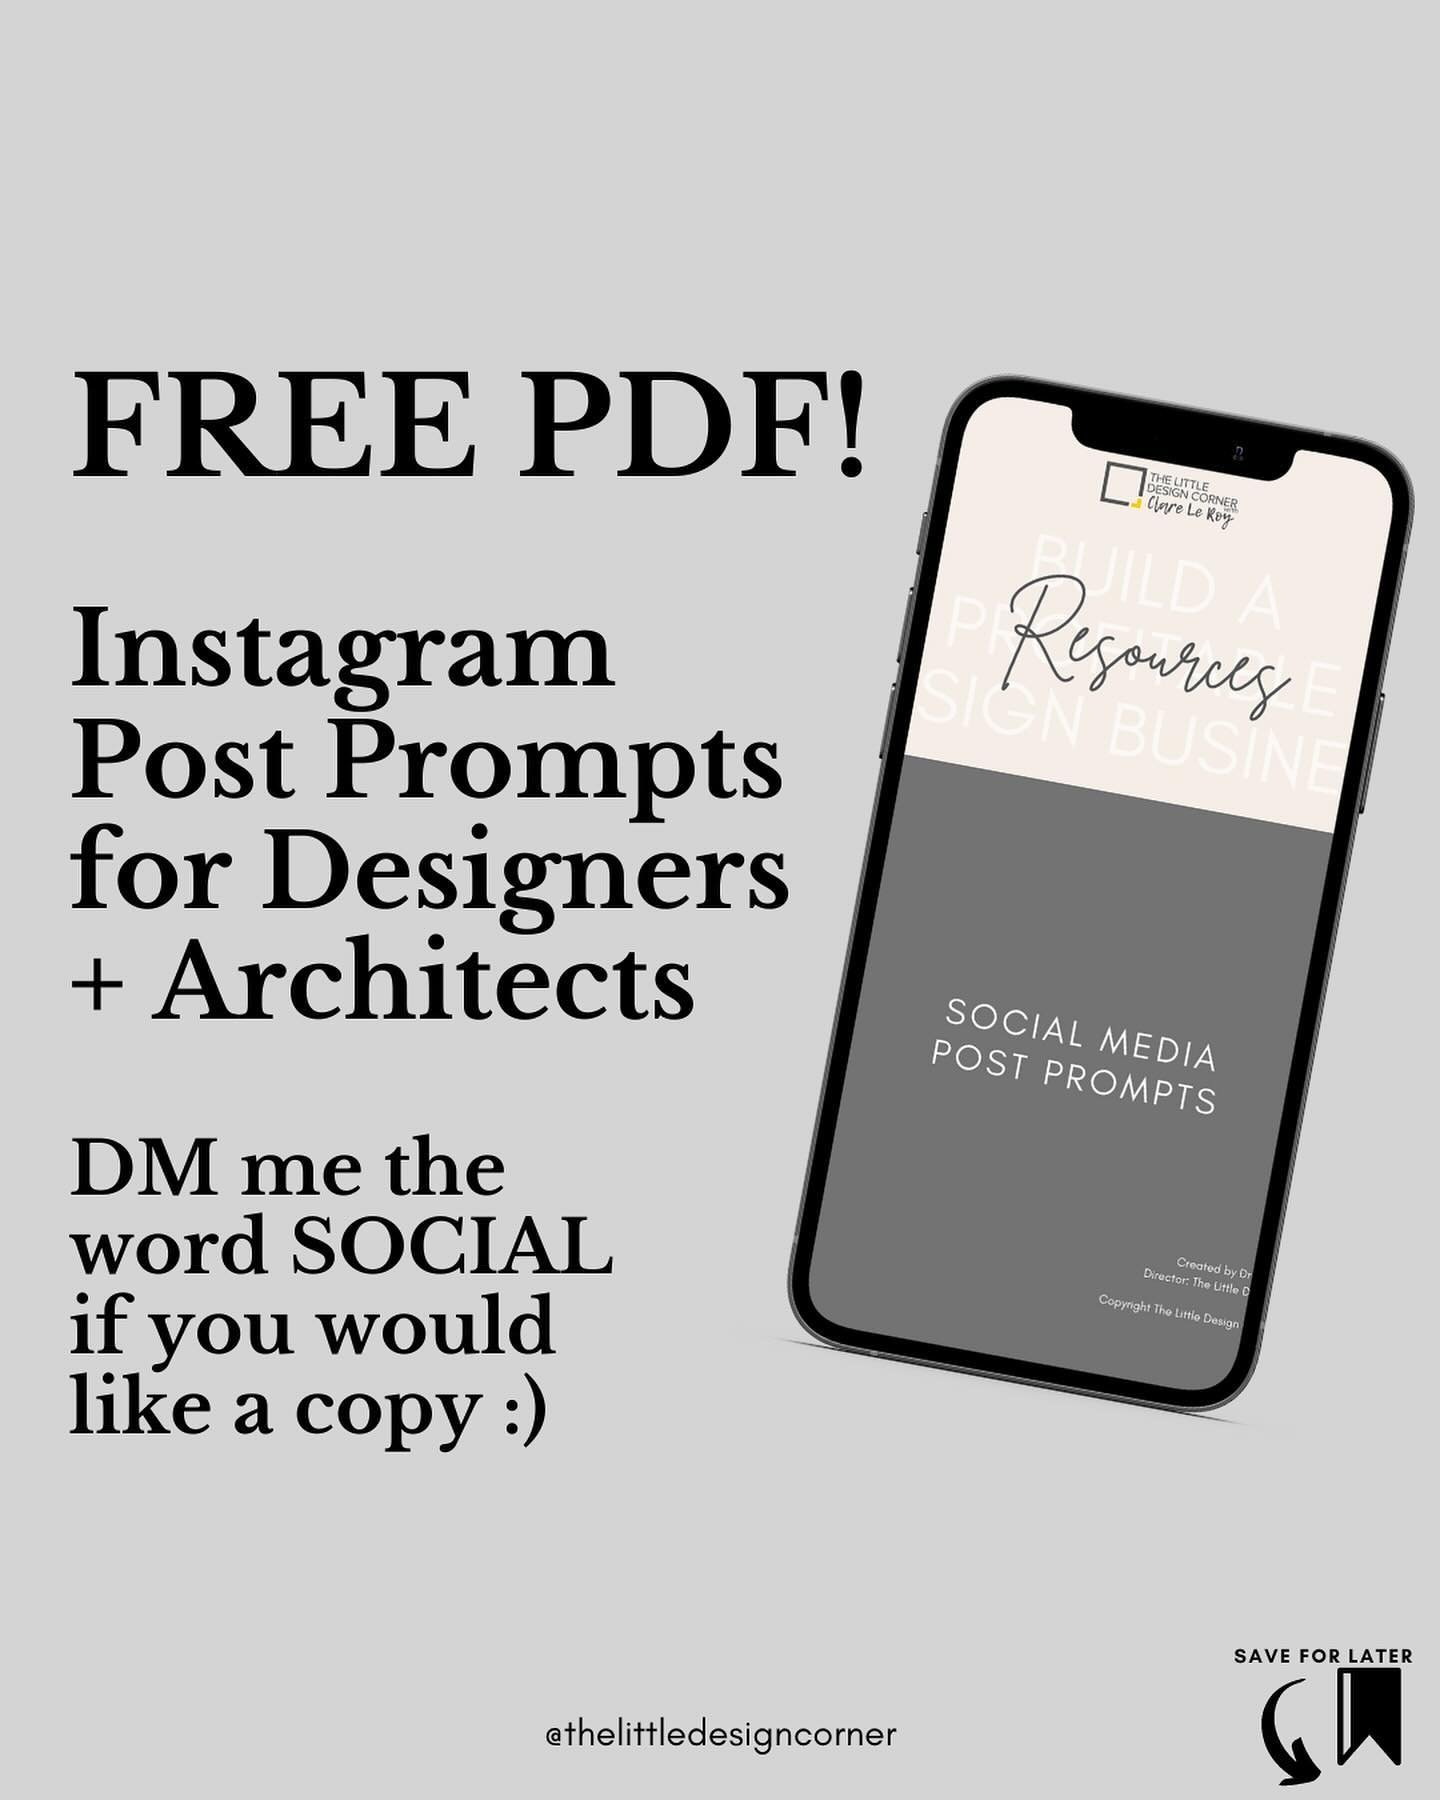 DM me the word SOCIAL if you want a copy of my free PDF resource! 😀⁠

&ldquo;I have no idea what to post on Instagram!&rdquo;⁠

I hear this regularly from designers in my community...⁠
...and honestly I&rsquo;m surprised by the statement as being a 